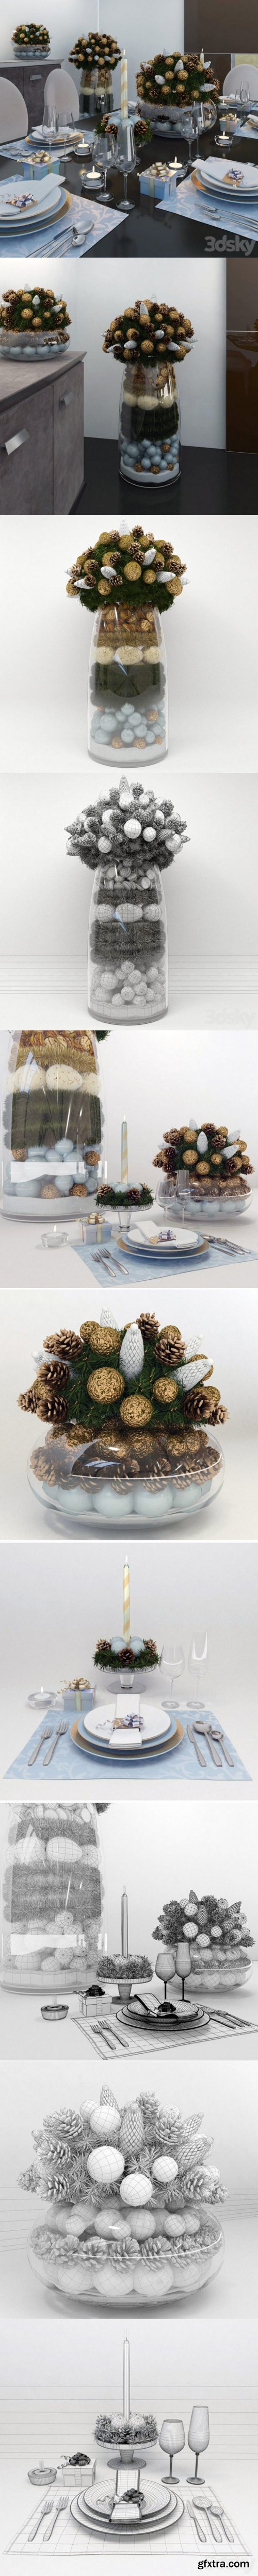 Christmas Decorations and Serving